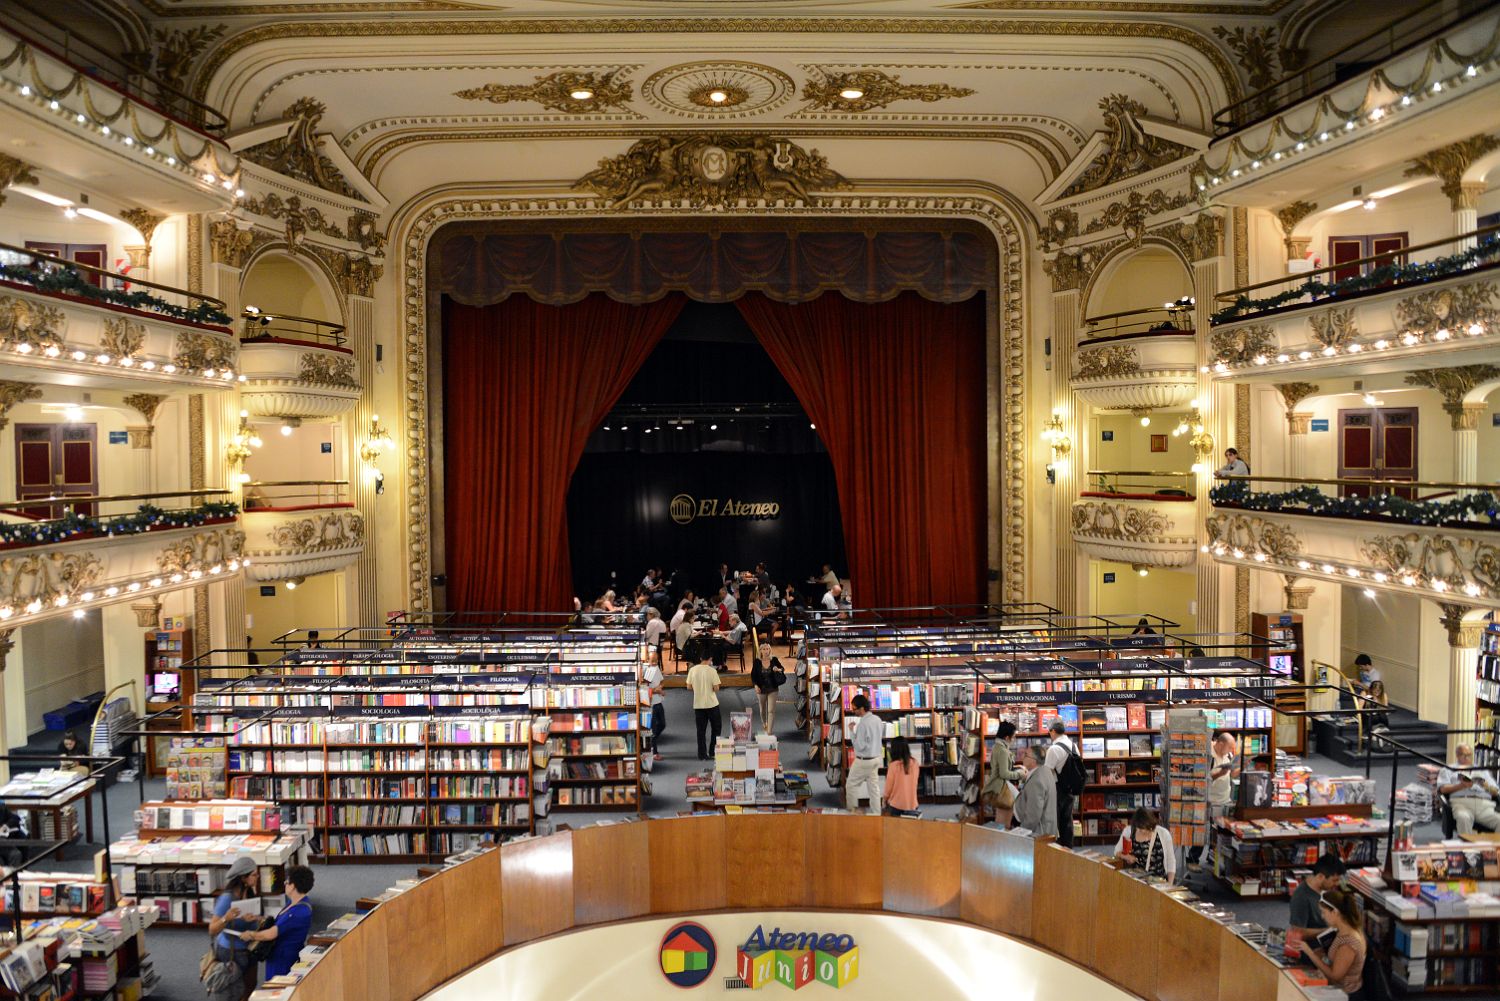 19 Ateneo Grand Splendid Bookstore Is In A Converted Theater On Av Sta Fe In Recoleta Buenos Aires